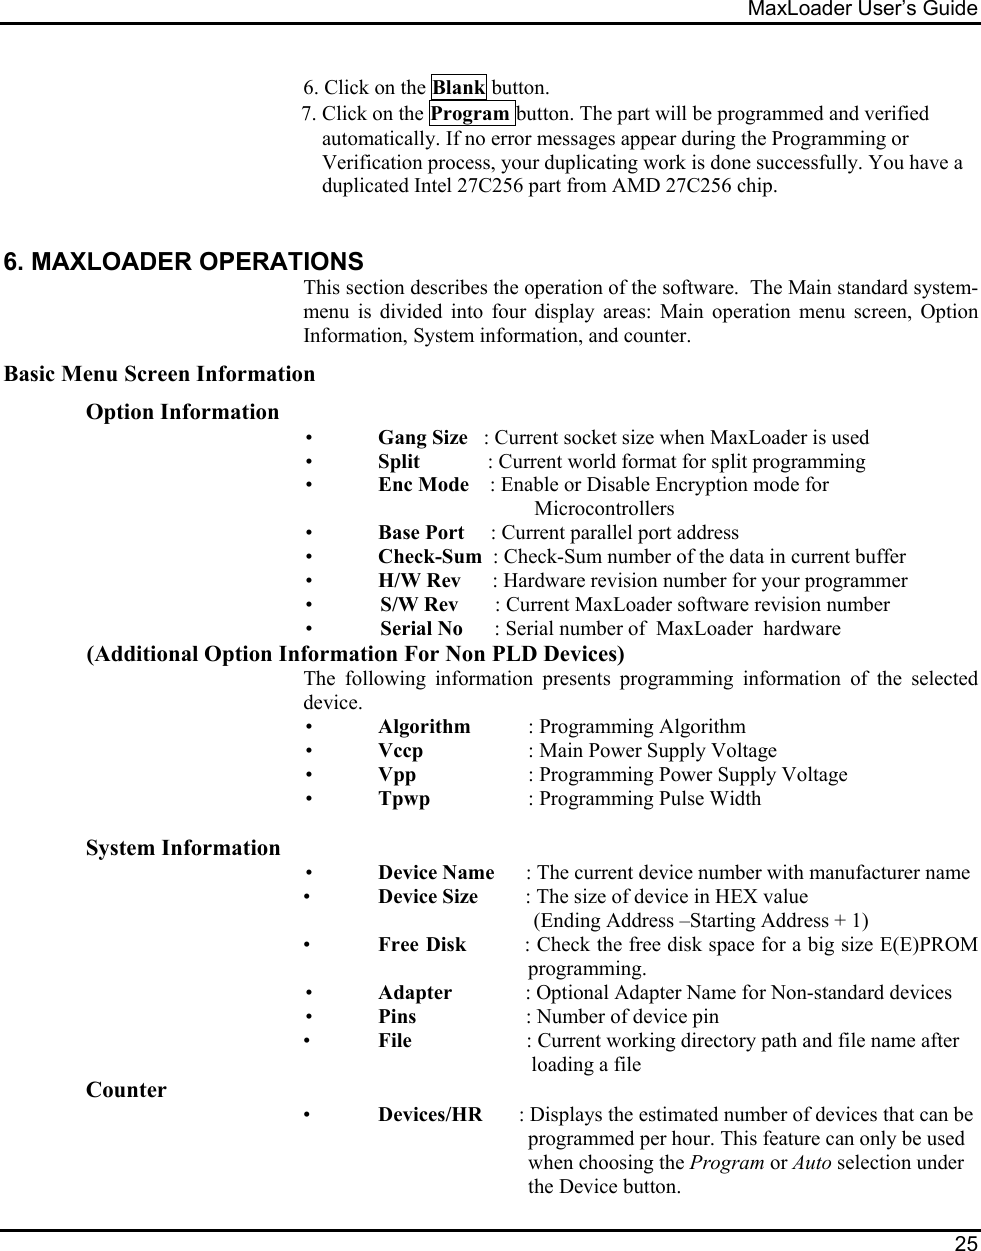 MaxLoader User’s Guide  25    6. Click on the Blank button. 7. Click on the Program button. The part will be programmed and verified automatically. If no error messages appear during the Programming or Verification process, your duplicating work is done successfully. You have a duplicated Intel 27C256 part from AMD 27C256 chip.  6. MAXLOADER OPERATIONS This section describes the operation of the software.  The Main standard system-menu is divided into four display areas: Main operation menu screen, Option Information, System information, and counter. Basic Menu Screen Information Option Information •  Gang Size   : Current socket size when MaxLoader is used •  Split             : Current world format for split programming •  Enc Mode    : Enable or Disable Encryption mode for Microcontrollers •  Base Port     : Current parallel port address •  Check-Sum  : Check-Sum number of the data in current buffer •  H/W Rev      : Hardware revision number for your programmer •             S/W Rev       : Current MaxLoader software revision number •             Serial No      : Serial number of  MaxLoader  hardware (Additional Option Information For Non PLD Devices) The following information presents programming information of the selected device. •  Algorithm  : Programming Algorithm                                                           •  Vccp          : Main Power Supply Voltage •  Vpp            : Programming Power Supply Voltage •  Tpwp          : Programming Pulse Width  System Information •  Device Name      : The current device number with manufacturer name •  Device Size         : The size of device in HEX value   (Ending Address –Starting Address + 1)  • Free Disk         : Check the free disk space for a big size E(E)PROM   programming. •  Adapter              : Optional Adapter Name for Non-standard devices •  Pins                     : Number of device pin  • File                      : Current working directory path and file name after                       loading a file Counter  • Devices/HR       : Displays the estimated number of devices that can be  programmed per hour. This feature can only be used  when choosing the Program or Auto selection under  the Device button. 